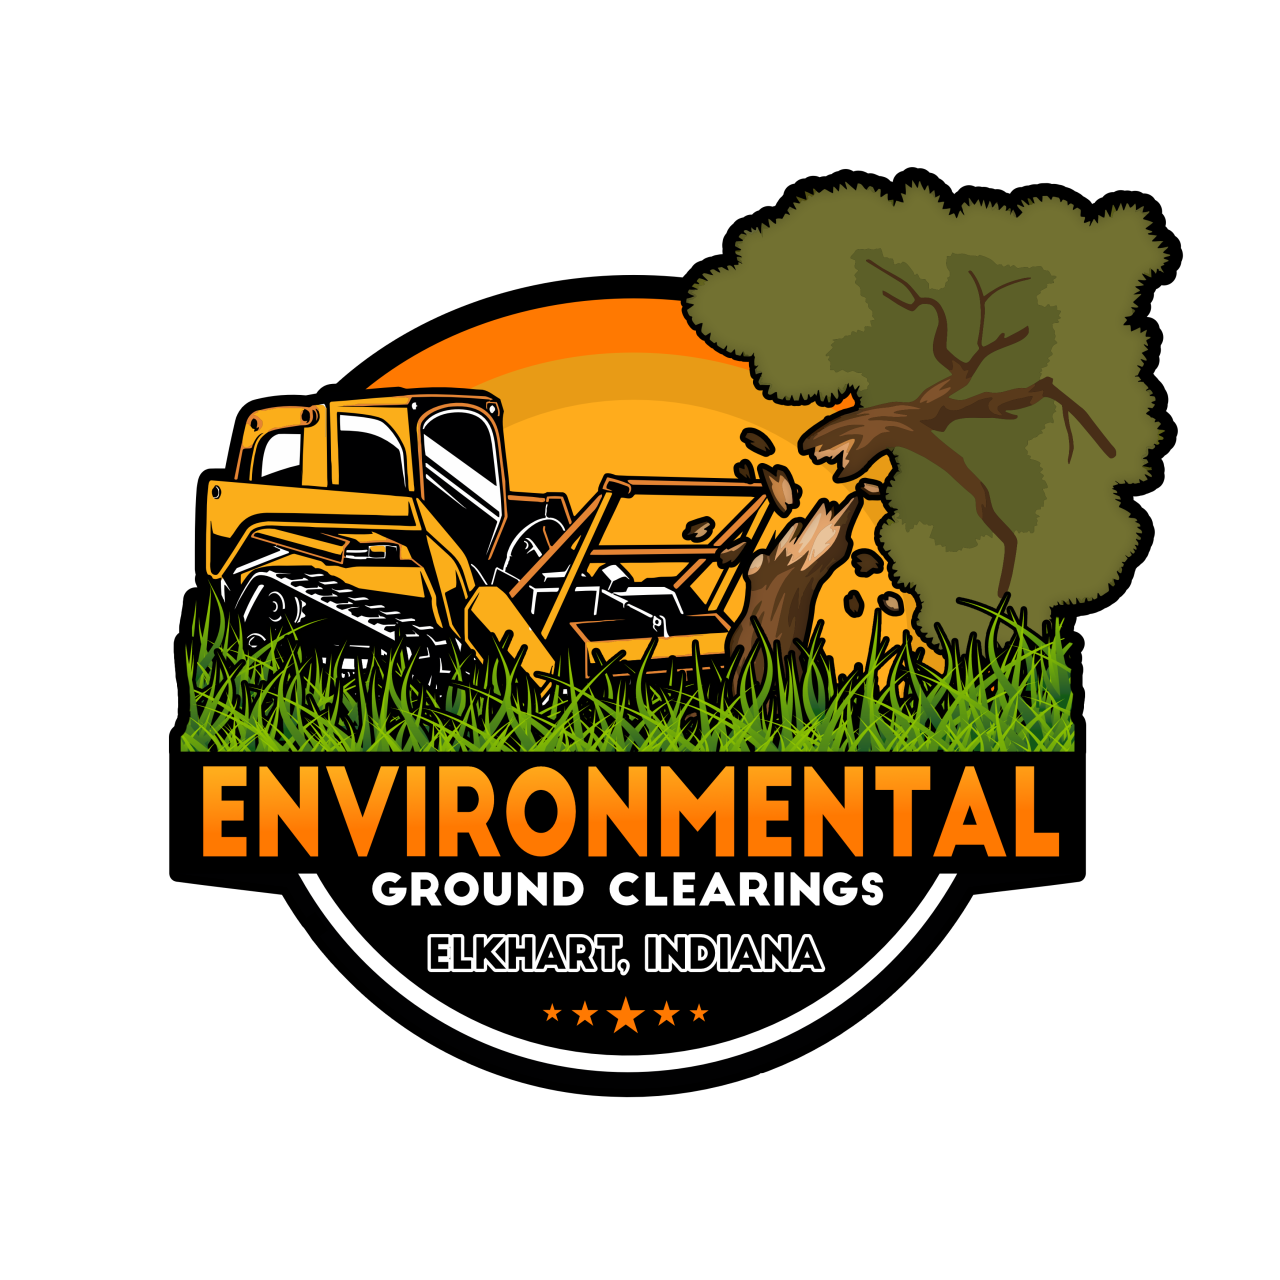 environmental ground clearings's logo